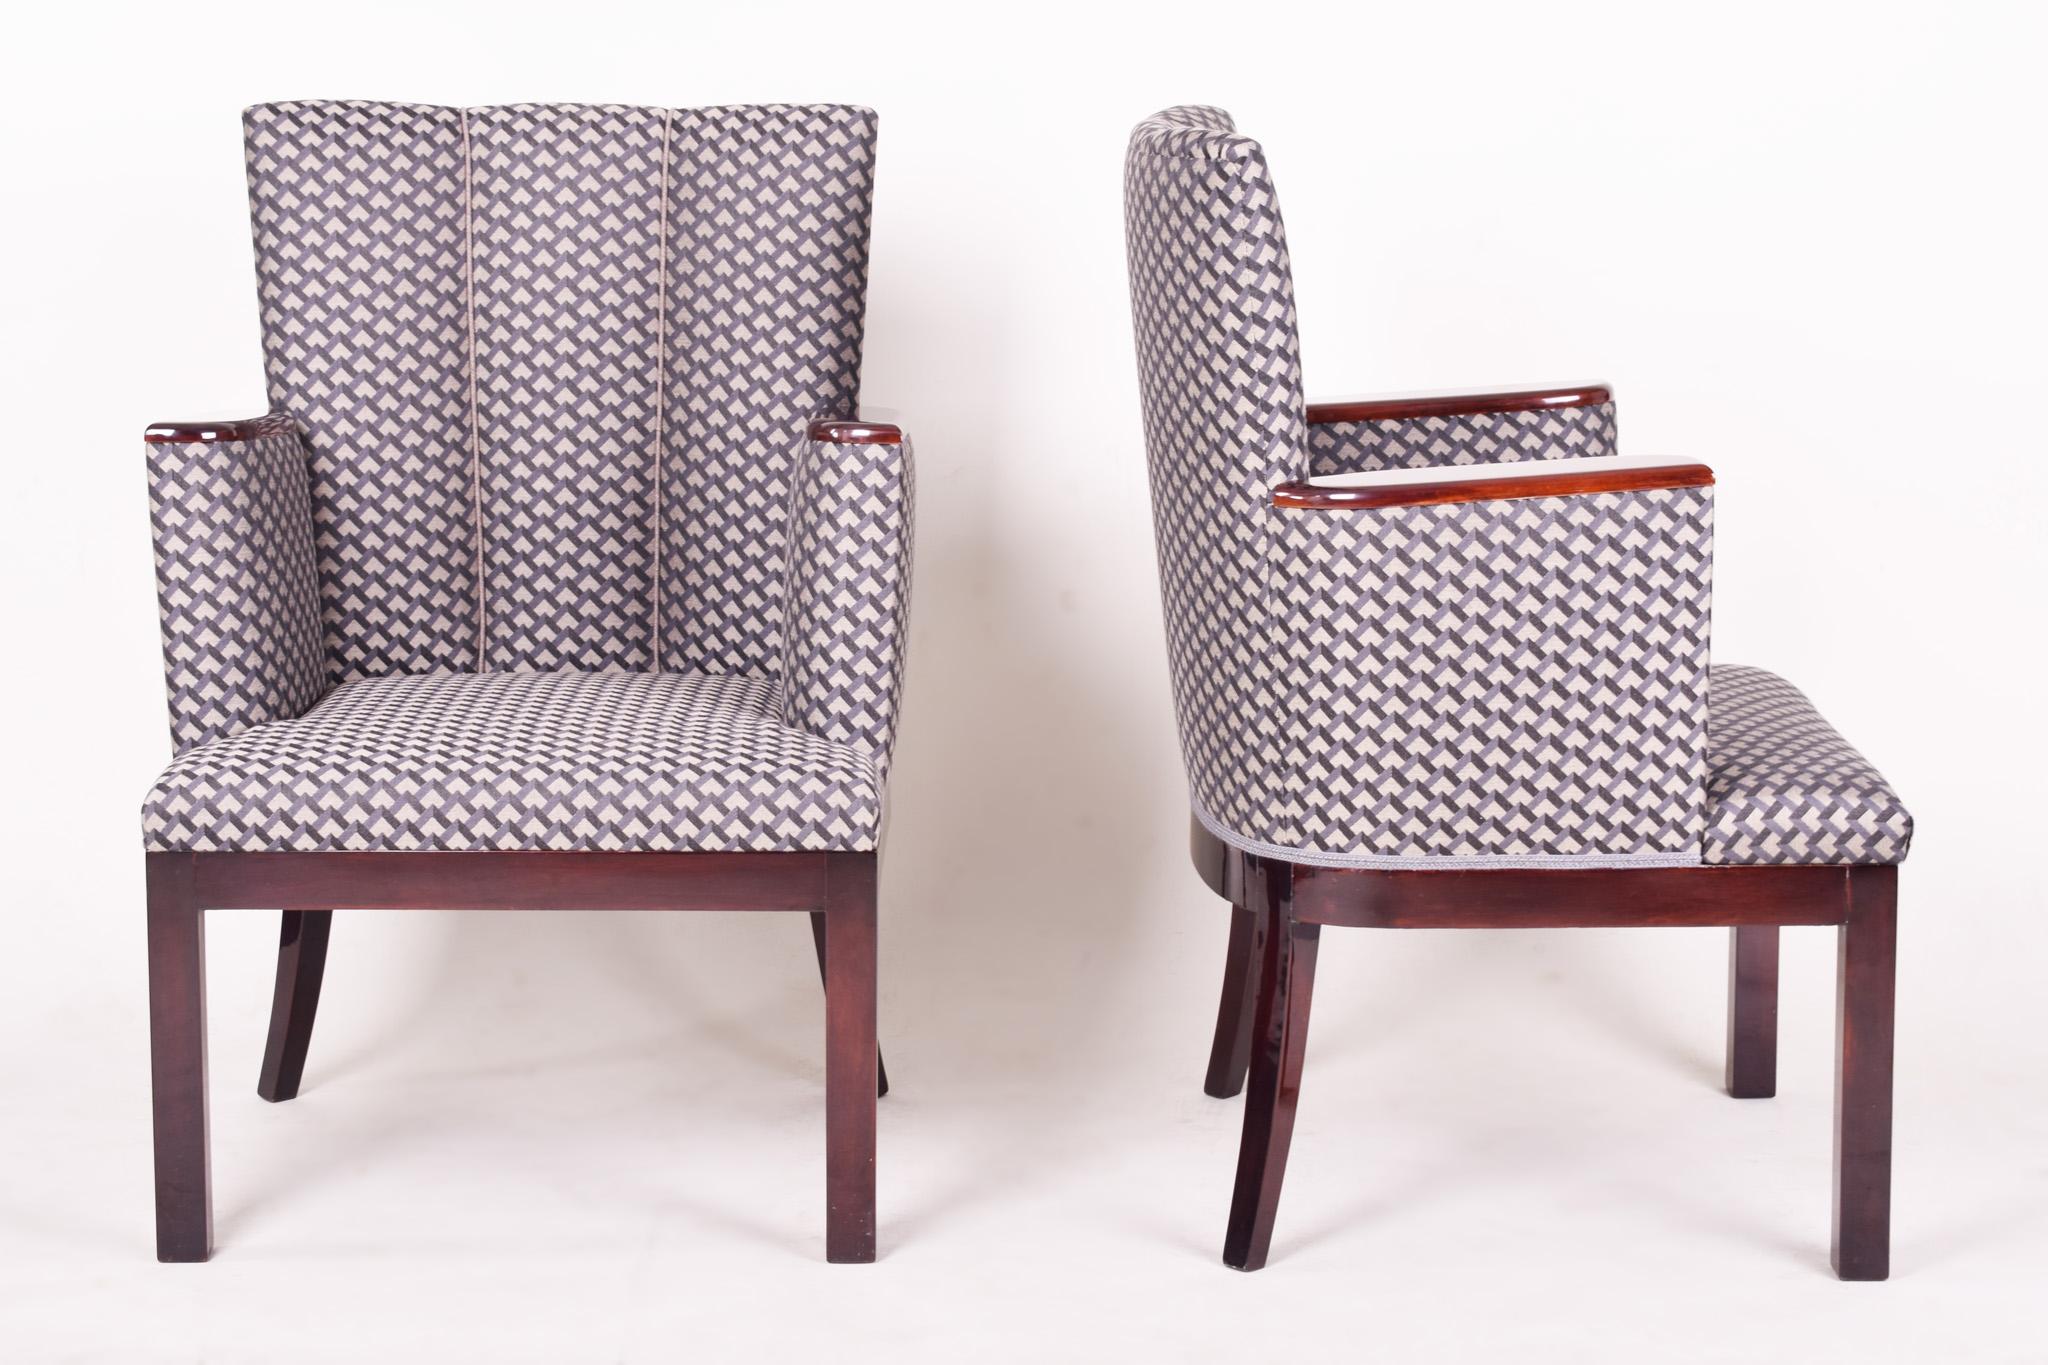 Czech Pair of Mahogany Art Deco Armchairs, Made in France, Fully Restored, 1920-1929 For Sale